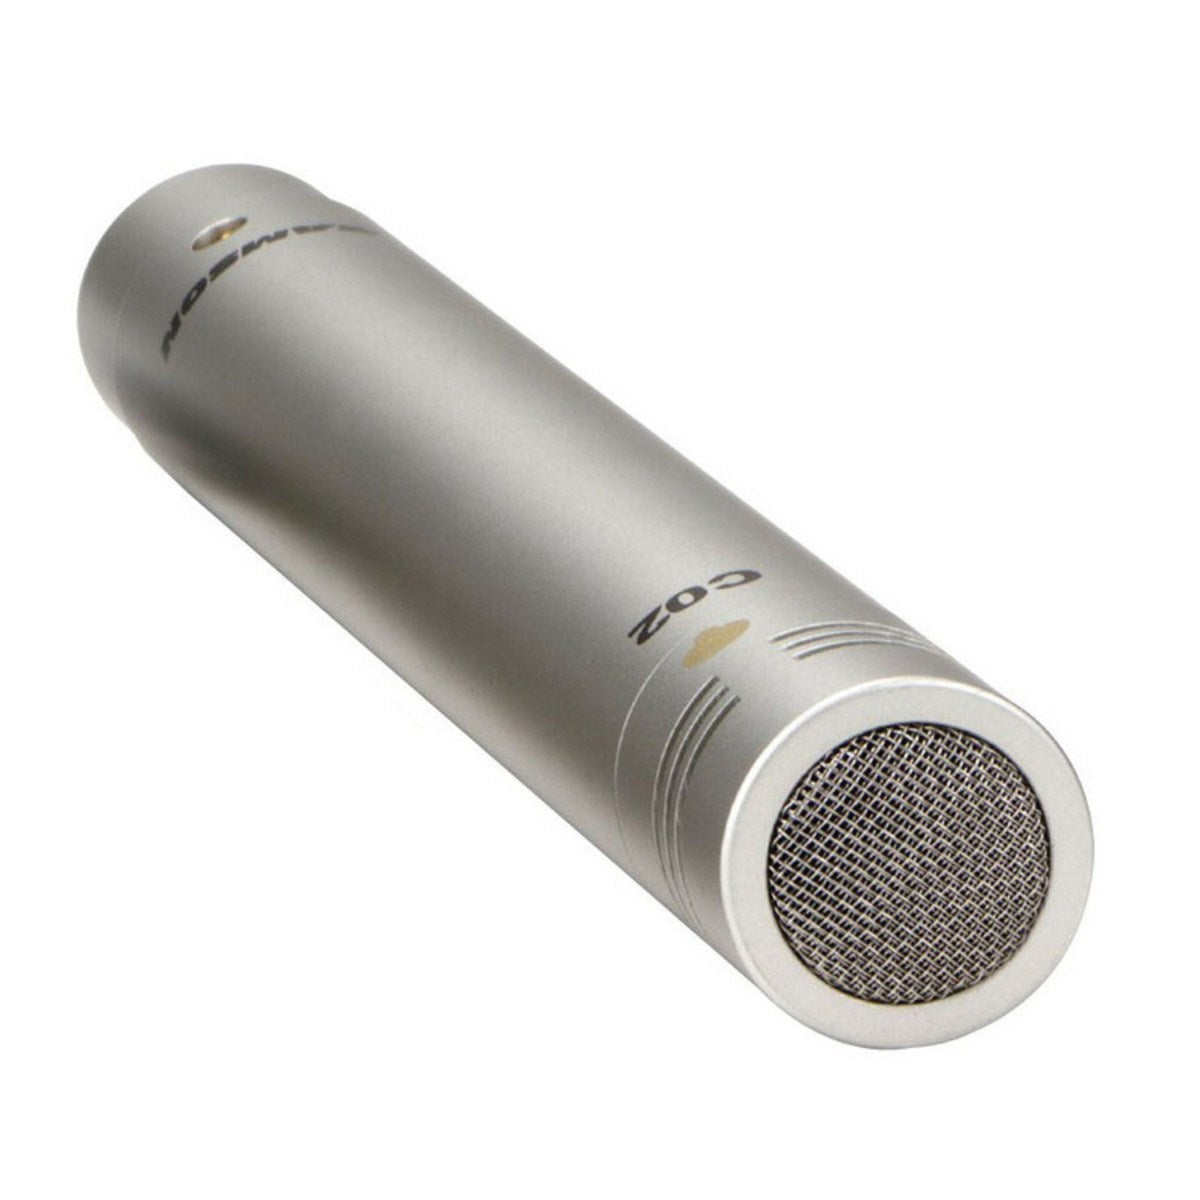 Samson C02 Pencil Cardioid Condenser Microphones with Gold Plated XLR Connectors (Available in Single and in Pair) for Studio, Recordings, Acoustics